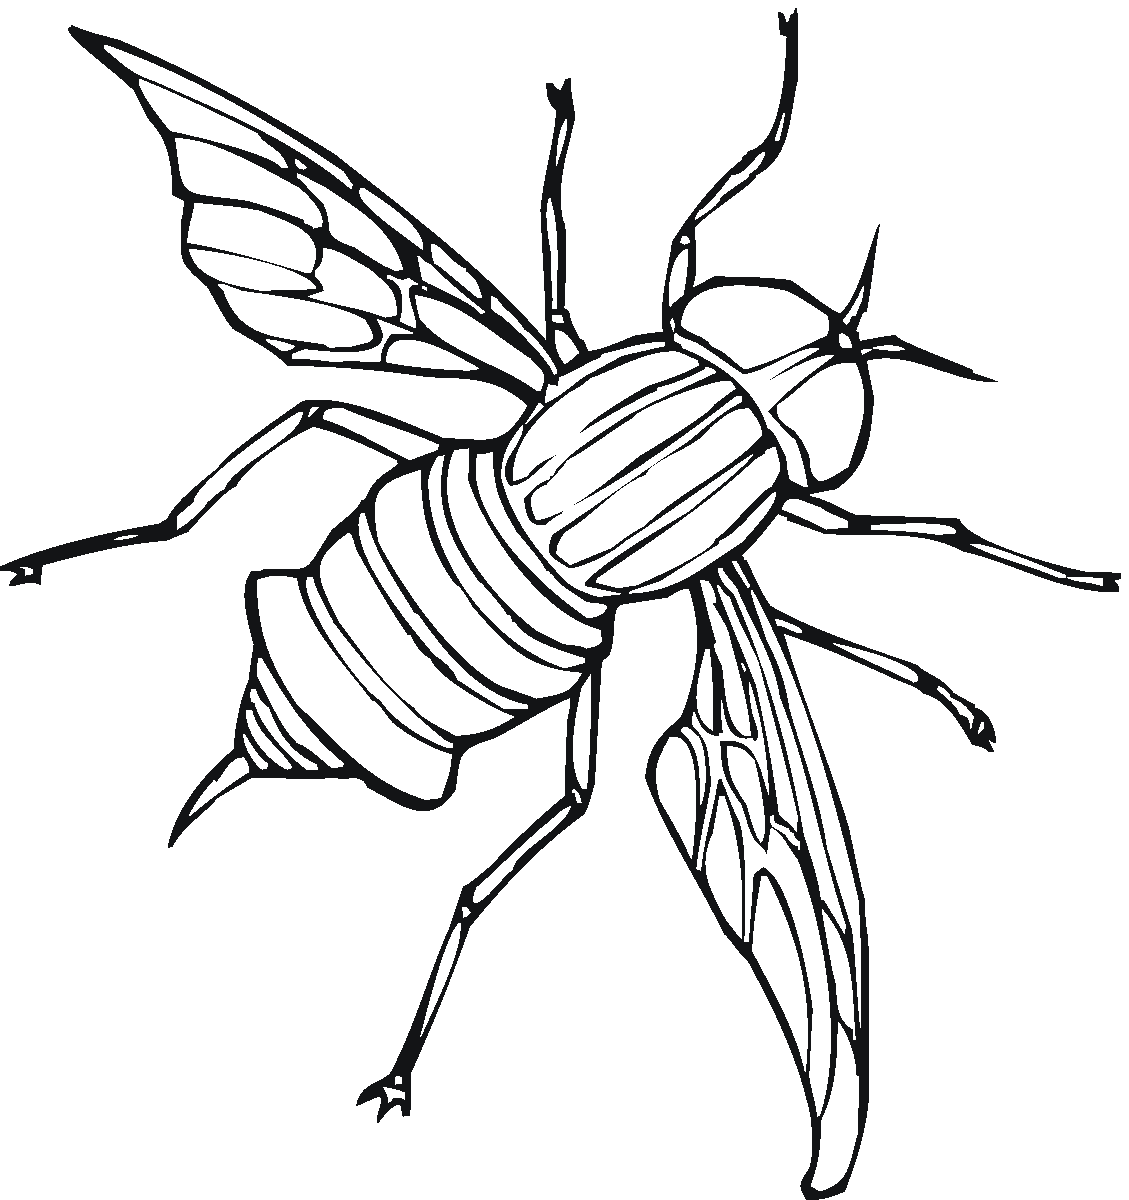 Flies Image Cute Coloring Page